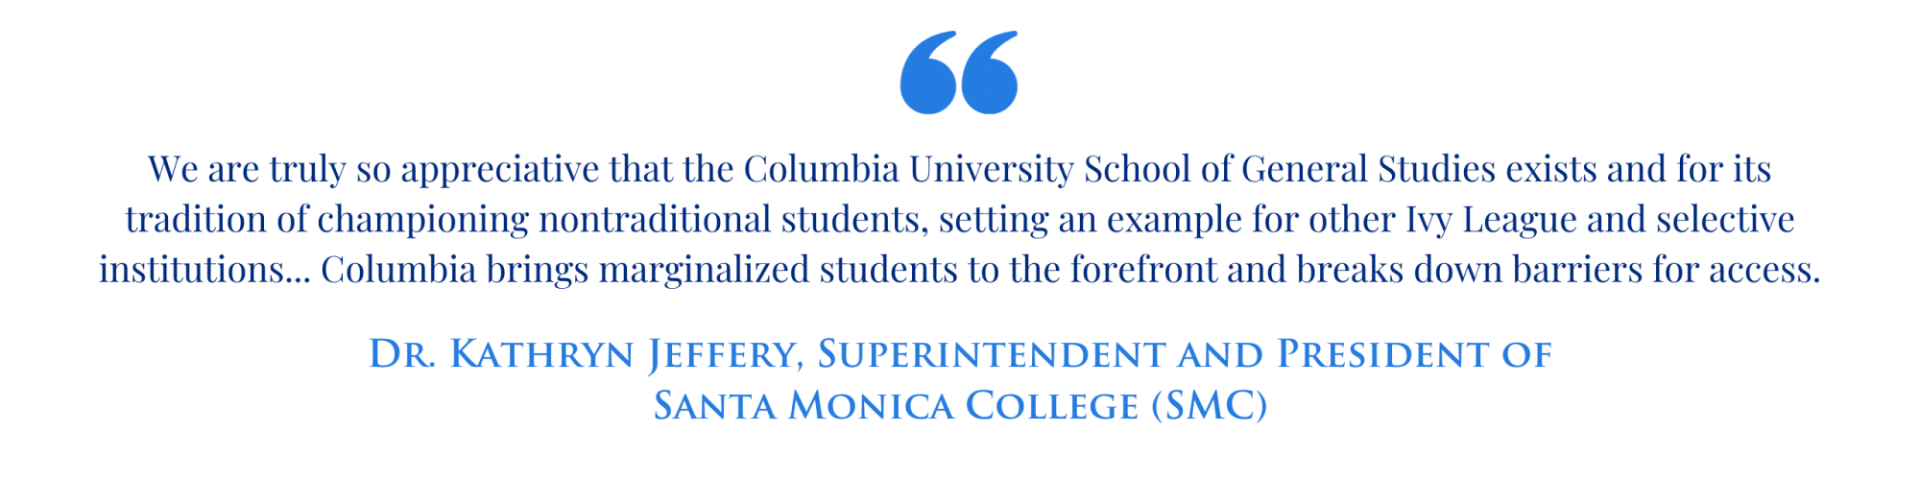 "We are truly so appreciative that the Columbia University School of General Studies exists and for its tradition of championing nontraditional students, setting an example for other Ivy League and selective institutions... Columbia brings marginalized students to the forefront and breaks down barriers for access." -Dr. Kathryn Jeffery, Superintendent and President of Santa Monica College (SMC)